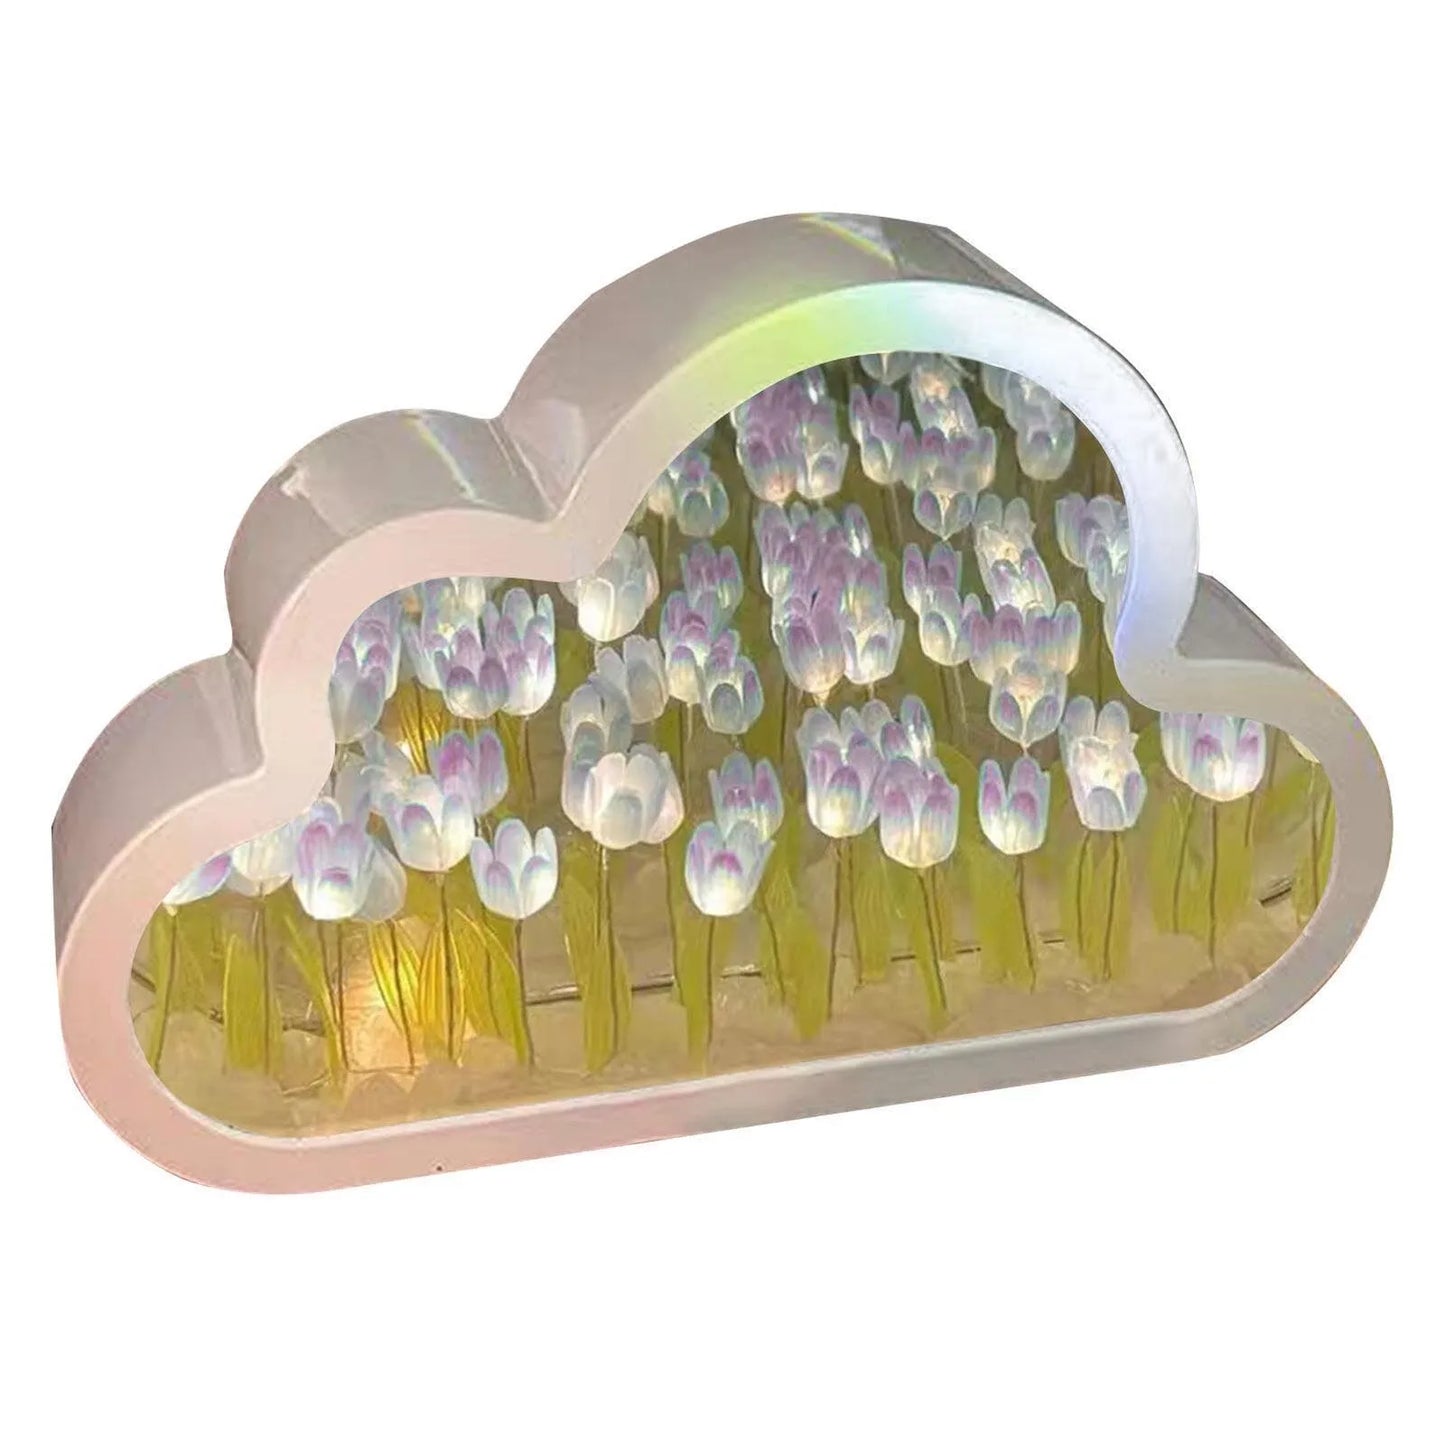 Decorative cloud-shaped LED night light with tulip-inspired mirror table lamps in a pastel color scheme, creating a whimsical and soothing bedroom ornament.